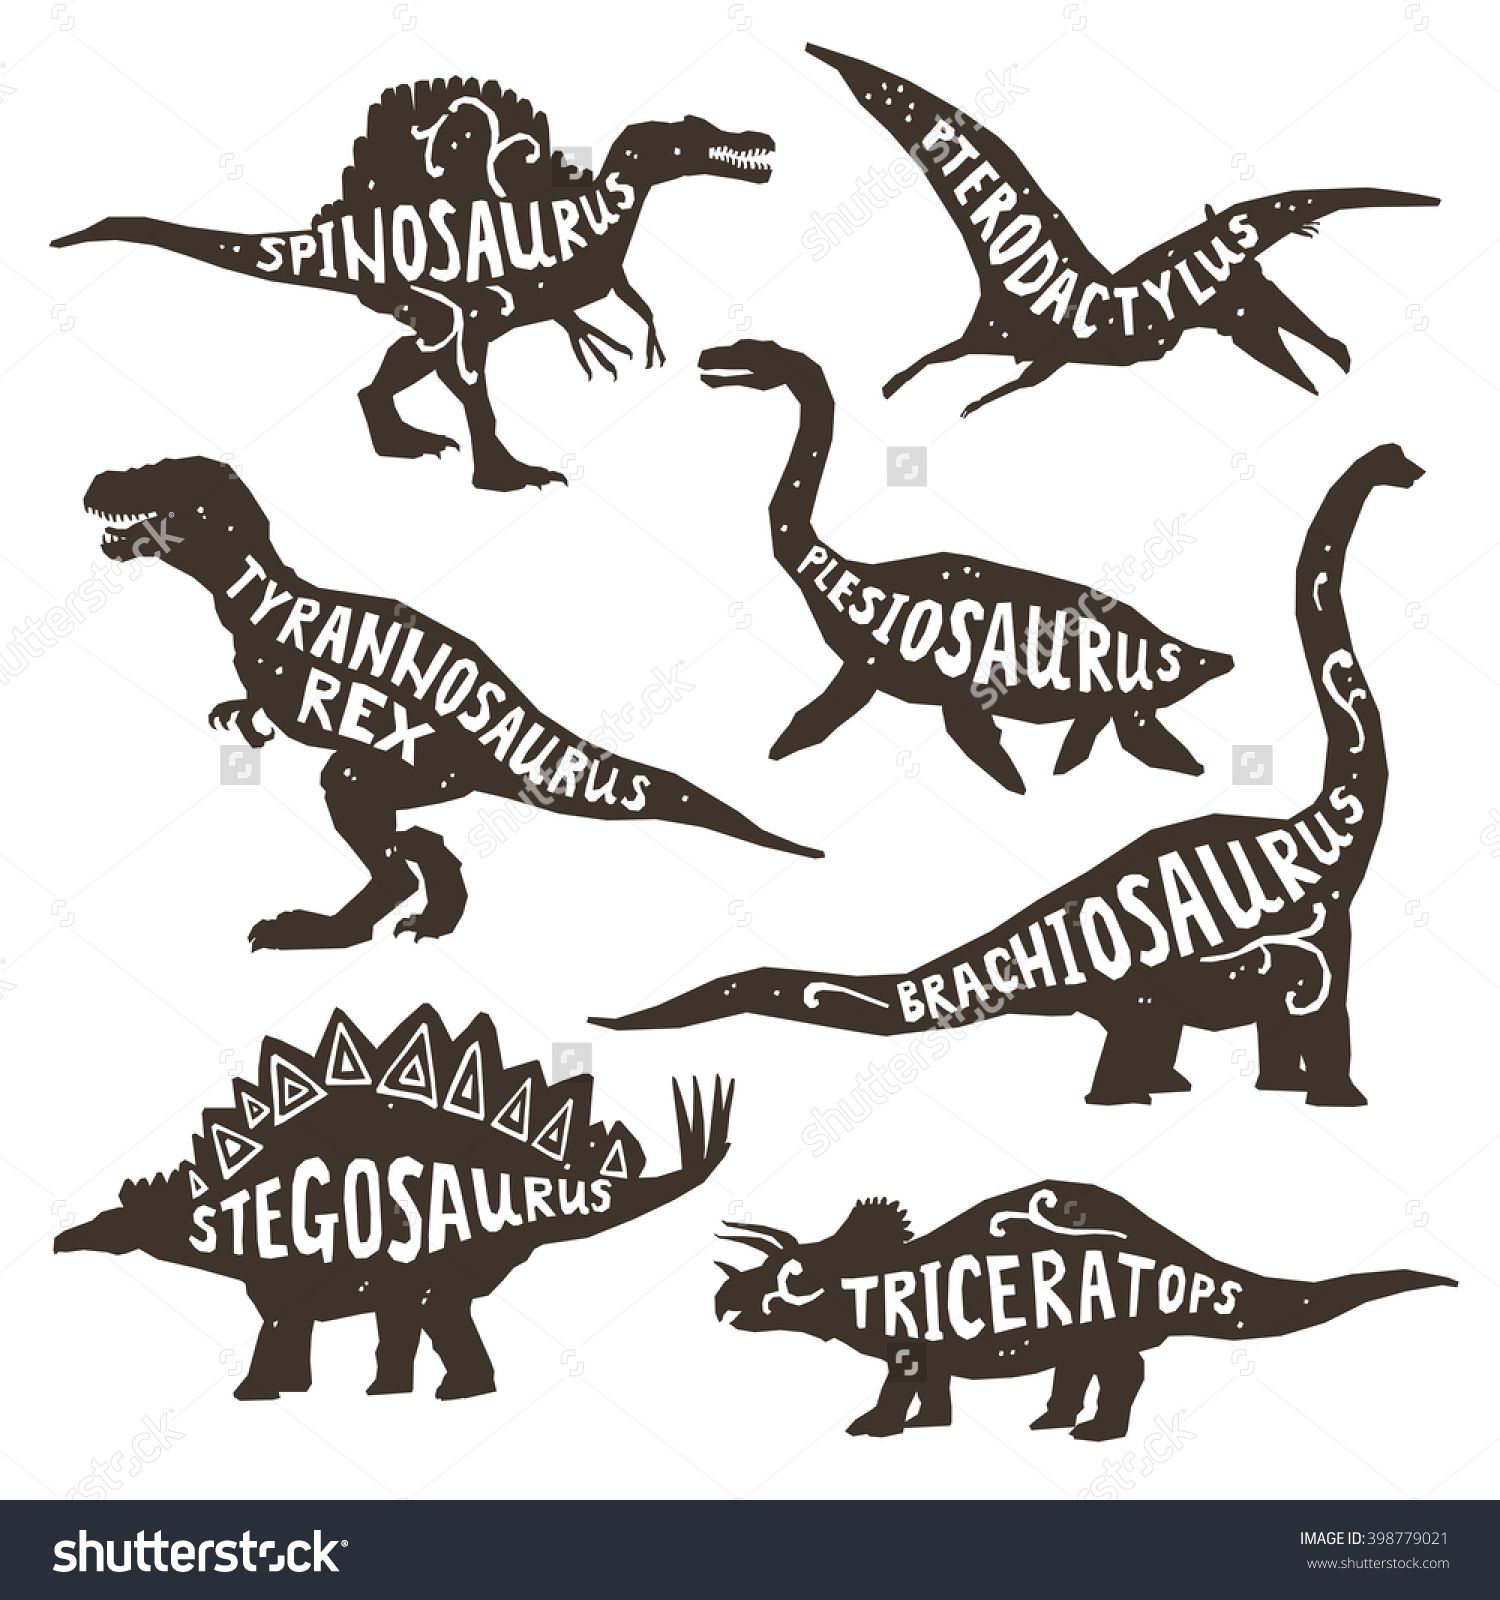 Dinosaurs Black Silhouettes Set With Lettering Pterodactyl